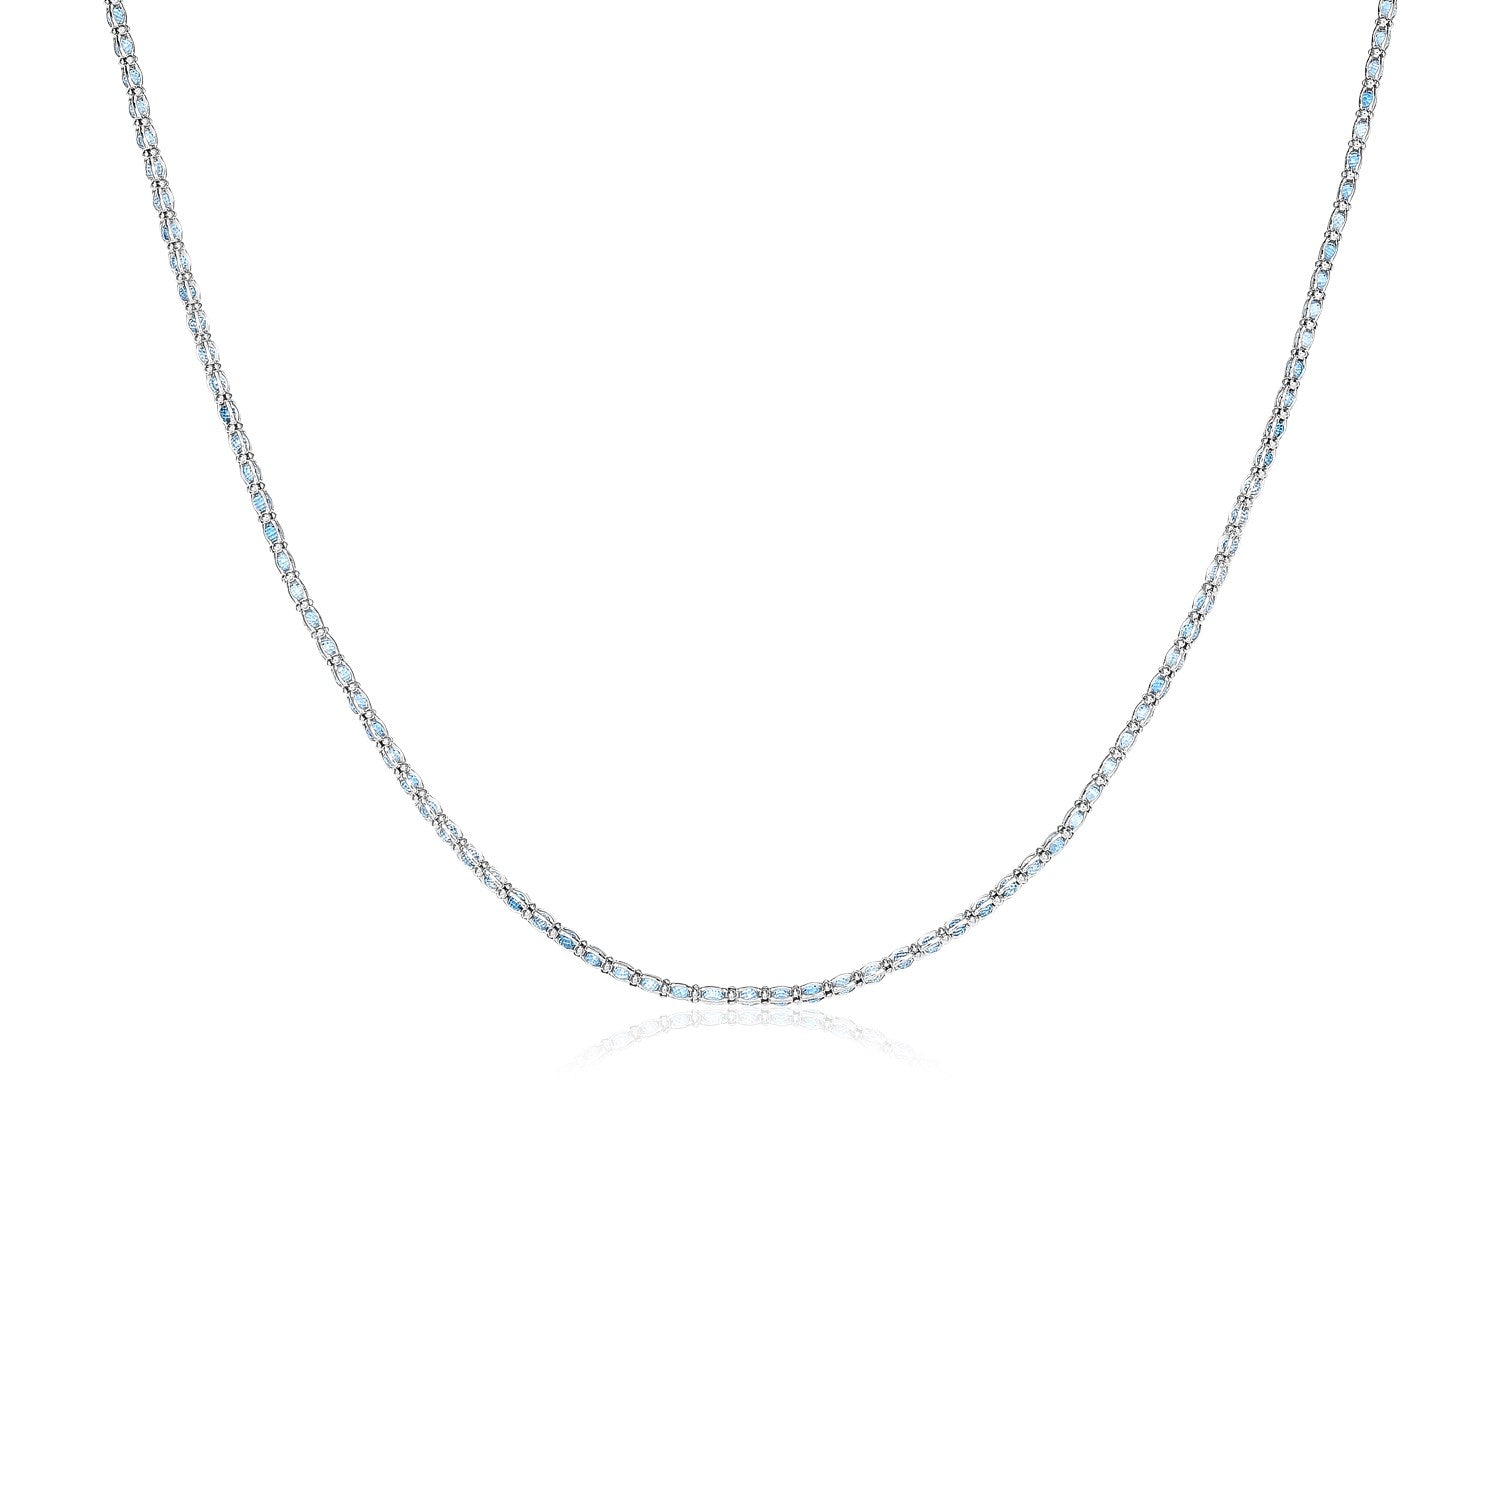 Sterling Silver 18 inch Necklace with Pale Blue Cubic Zirconias